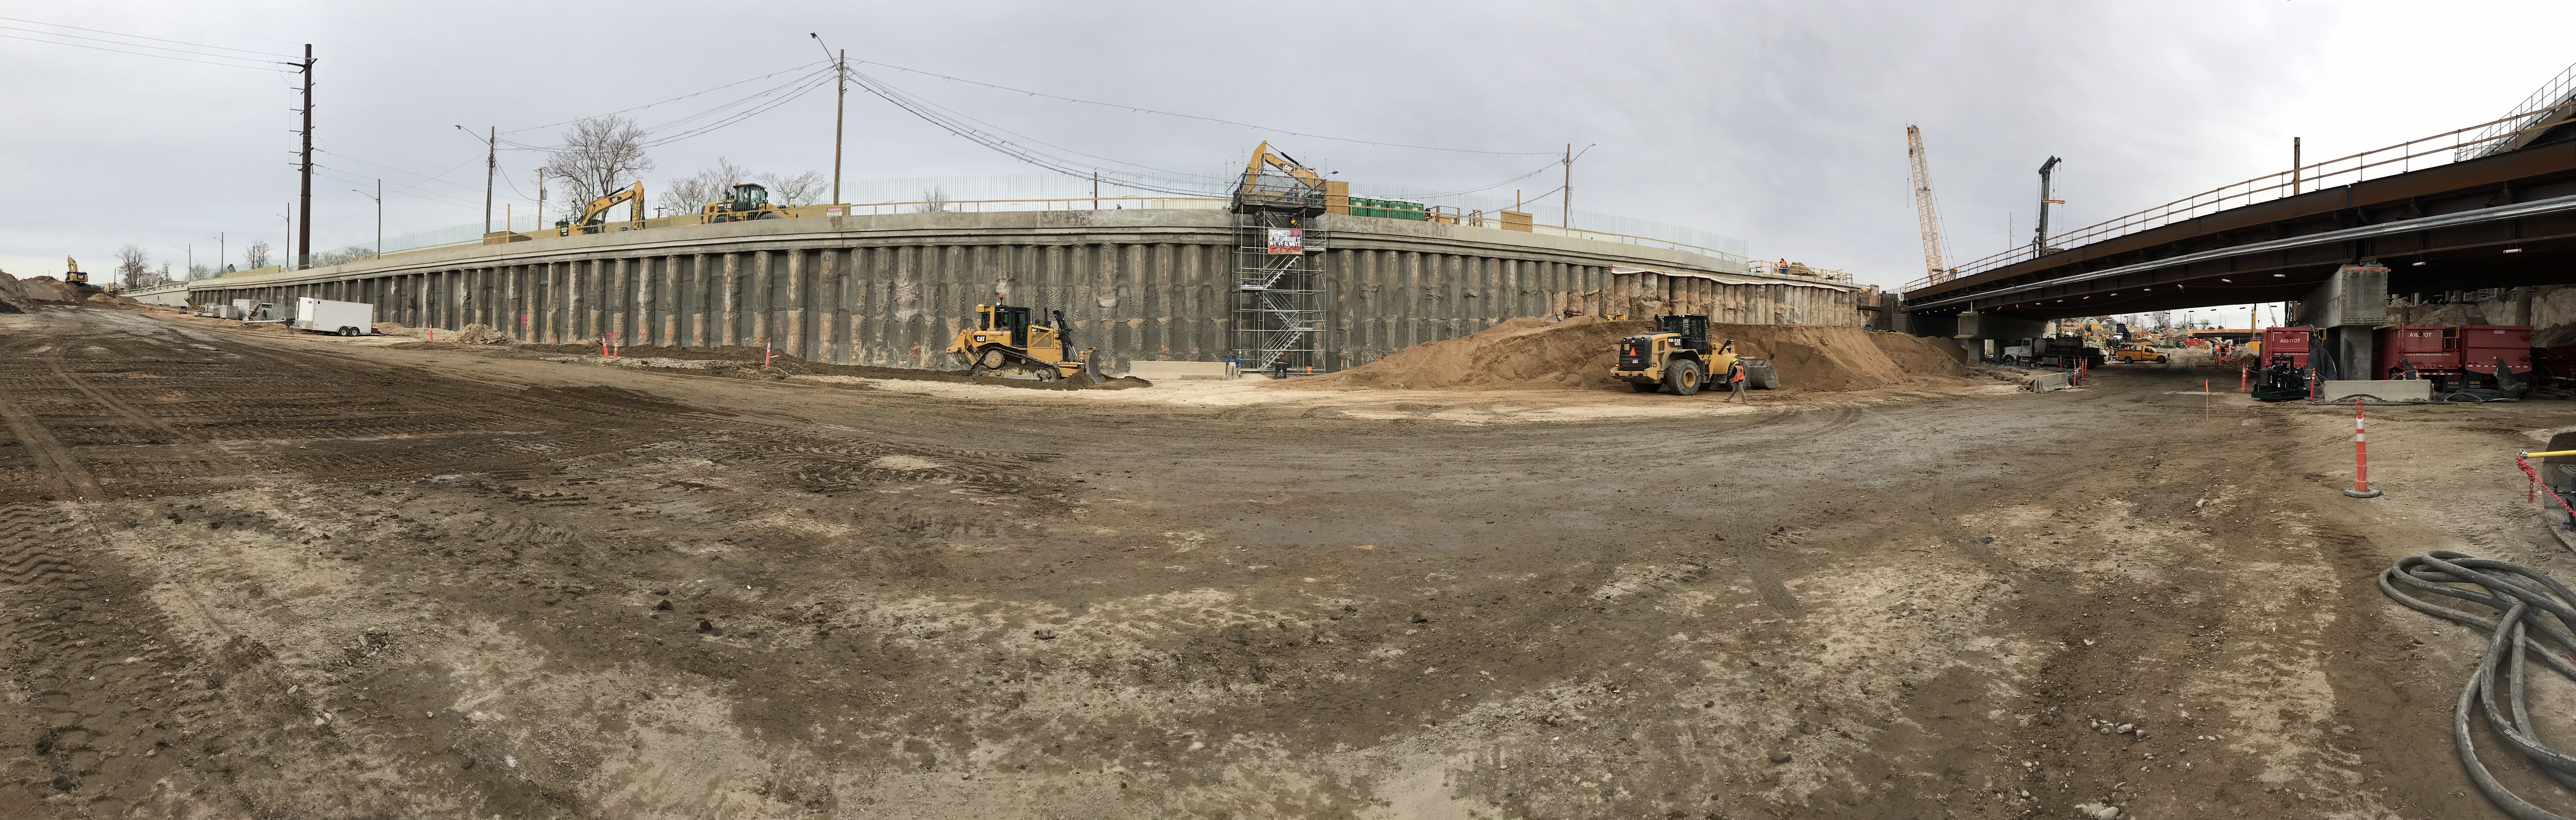 Panoramic view of the future westbound lanes of I-70 just west of Union Pacific Railroad (UPRR)  detail image